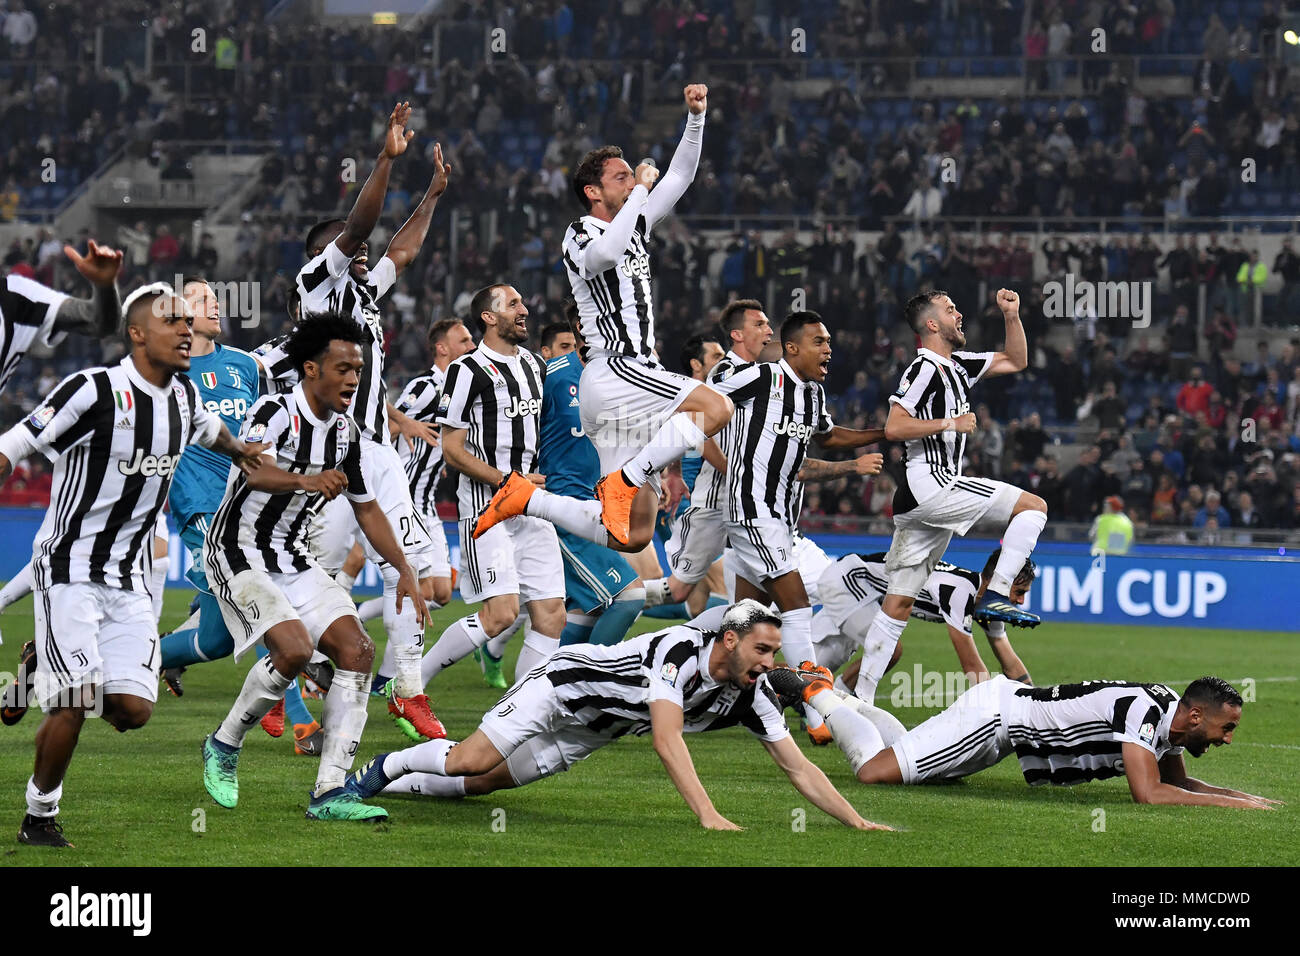 Juventus players celebrate at the end of the match. Esultanza giocatori  Juventus Roma 09-05-2018